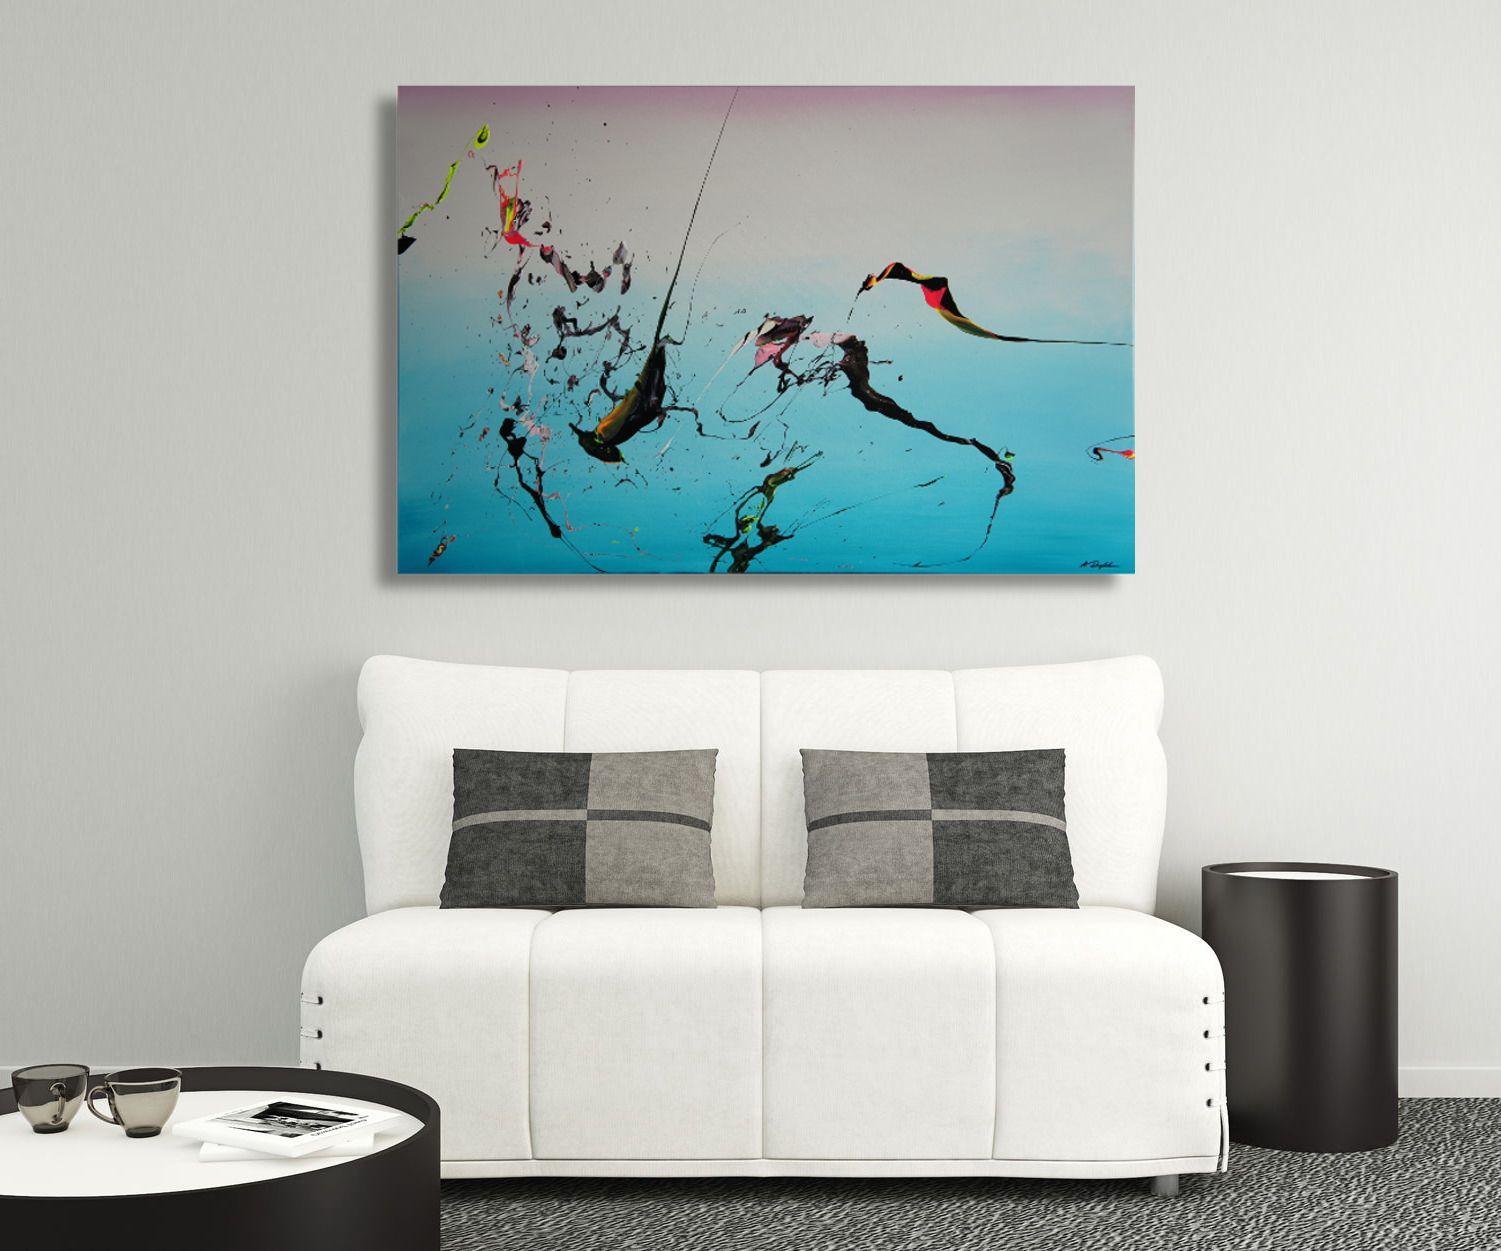 This is a simplistic one from my Spirits Of Skies Collection.  It comes with black and some neon colored accents against the wide open sky. Enjoy!    Unique painting using high-quality acrylic colors on gallery canvas (stapled on the back), glossy